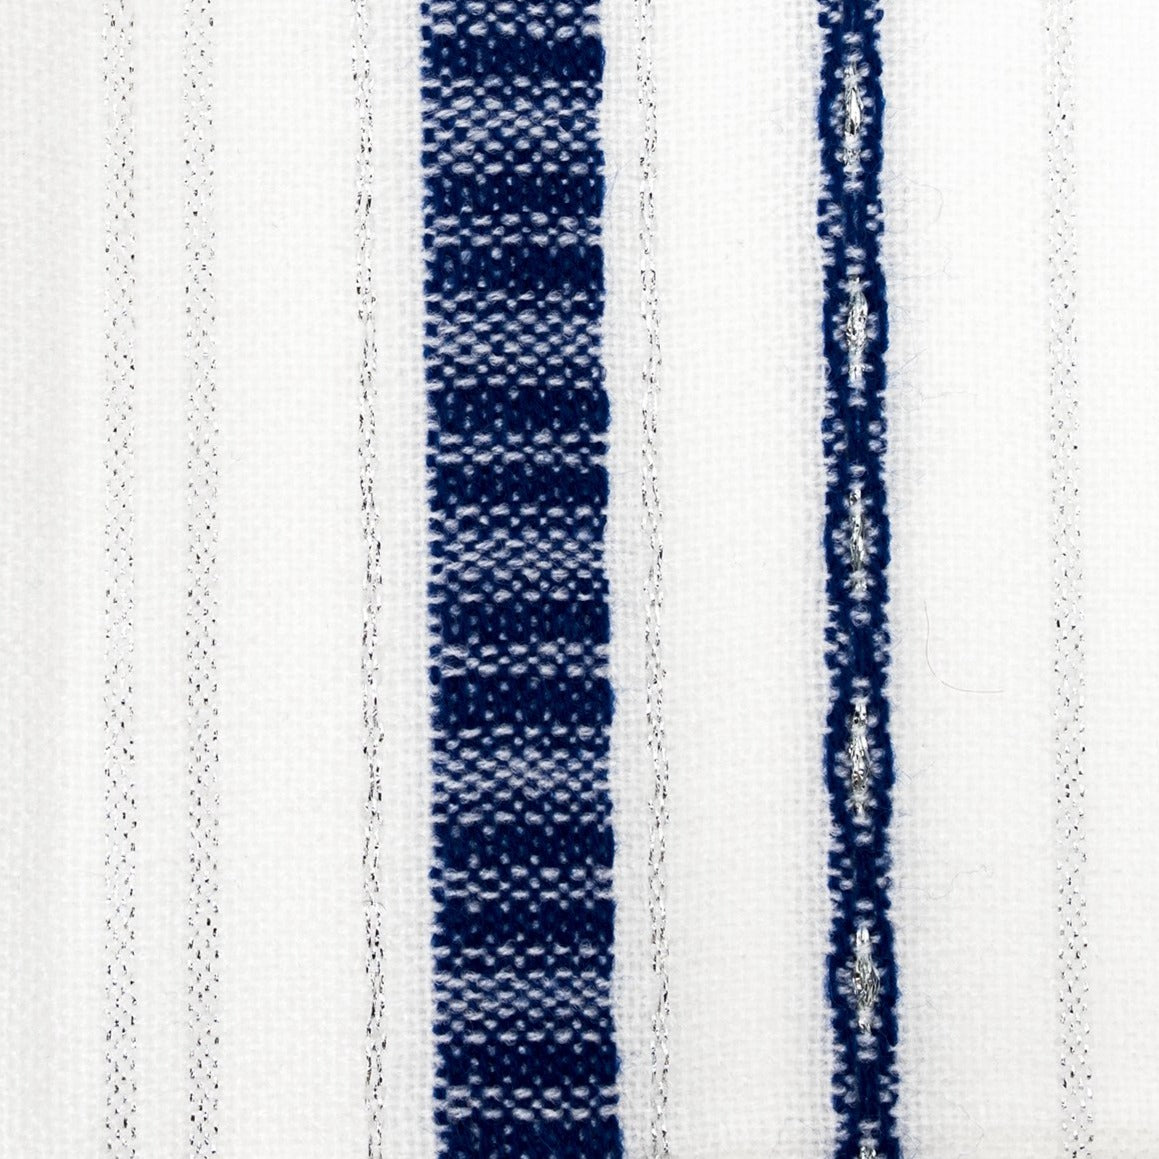 Tablecloths - Bold Design - Blue and Silver on White